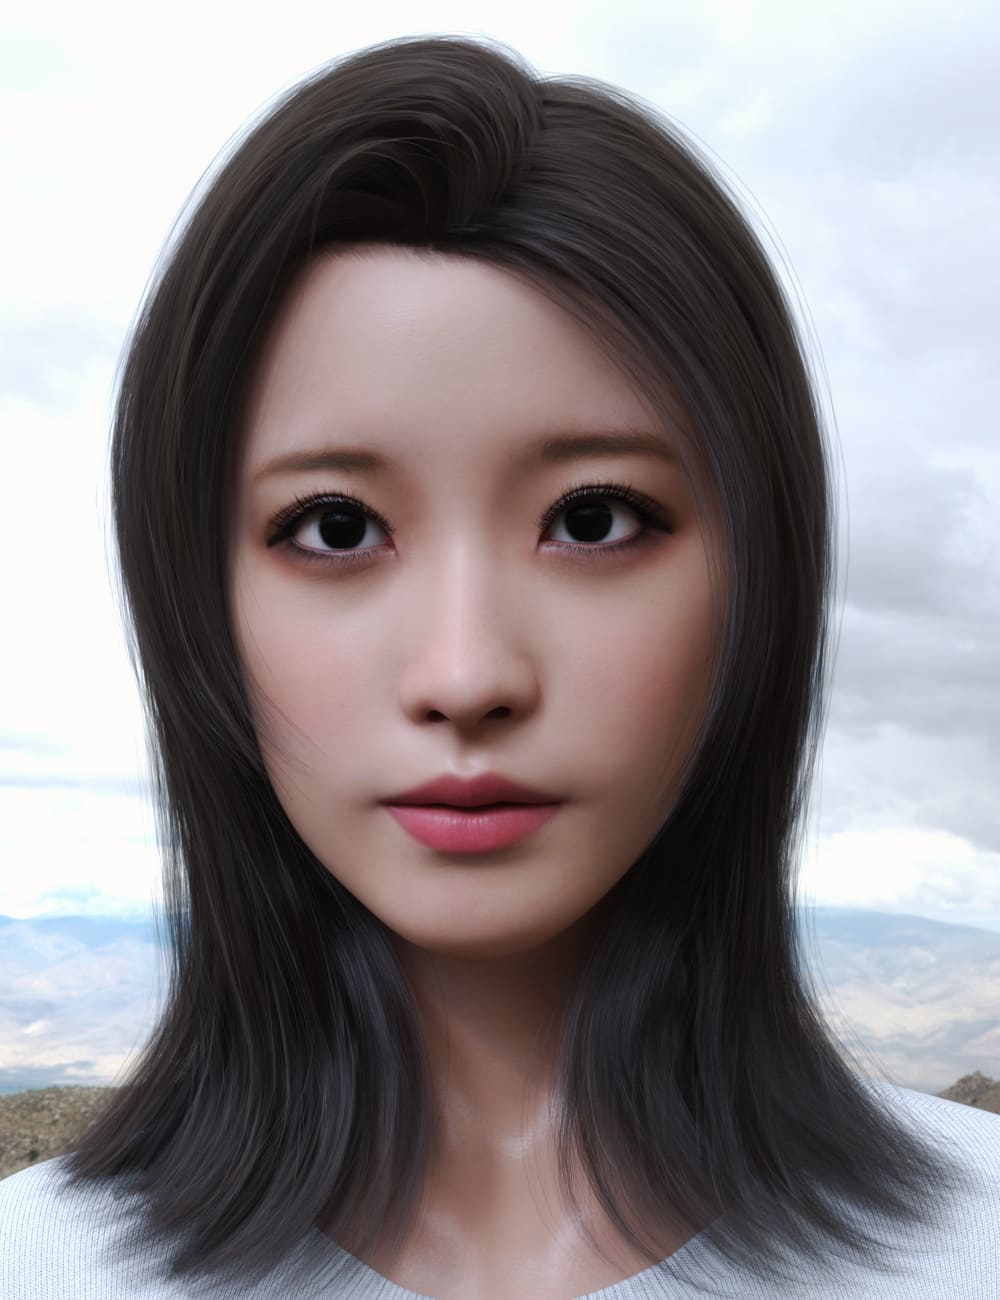 Yami Character And Hair For Genesis 8.1 Female_DAZ3D下载站